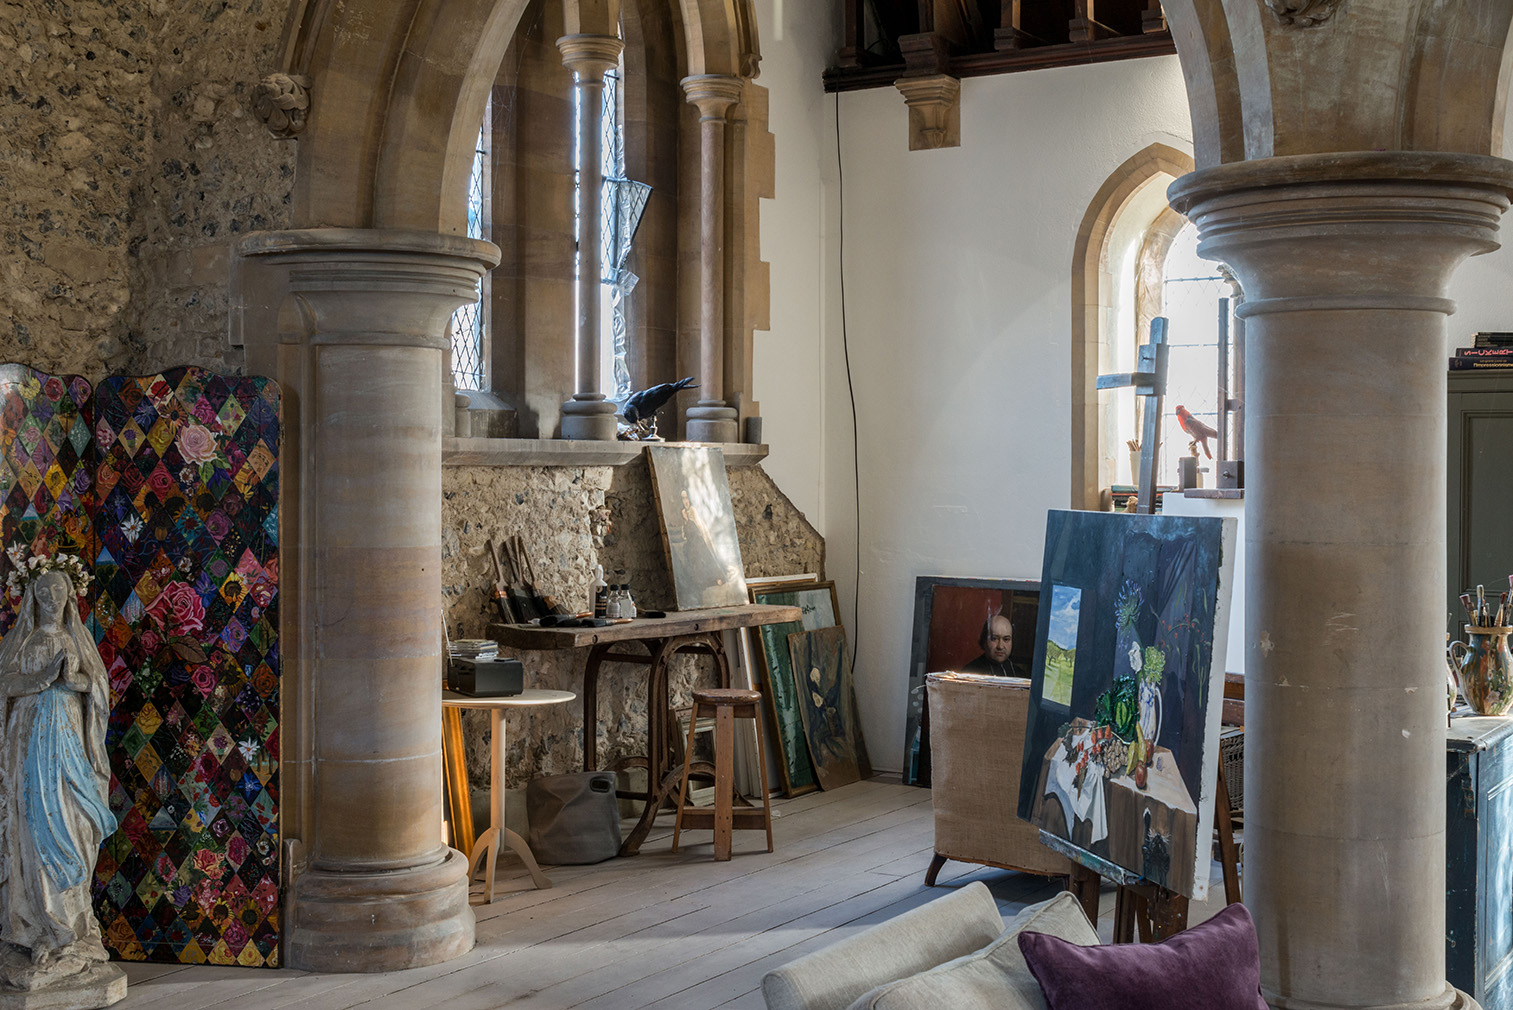 Go inside a dramatic Gothic church conversion in the UK’s Kent countryside